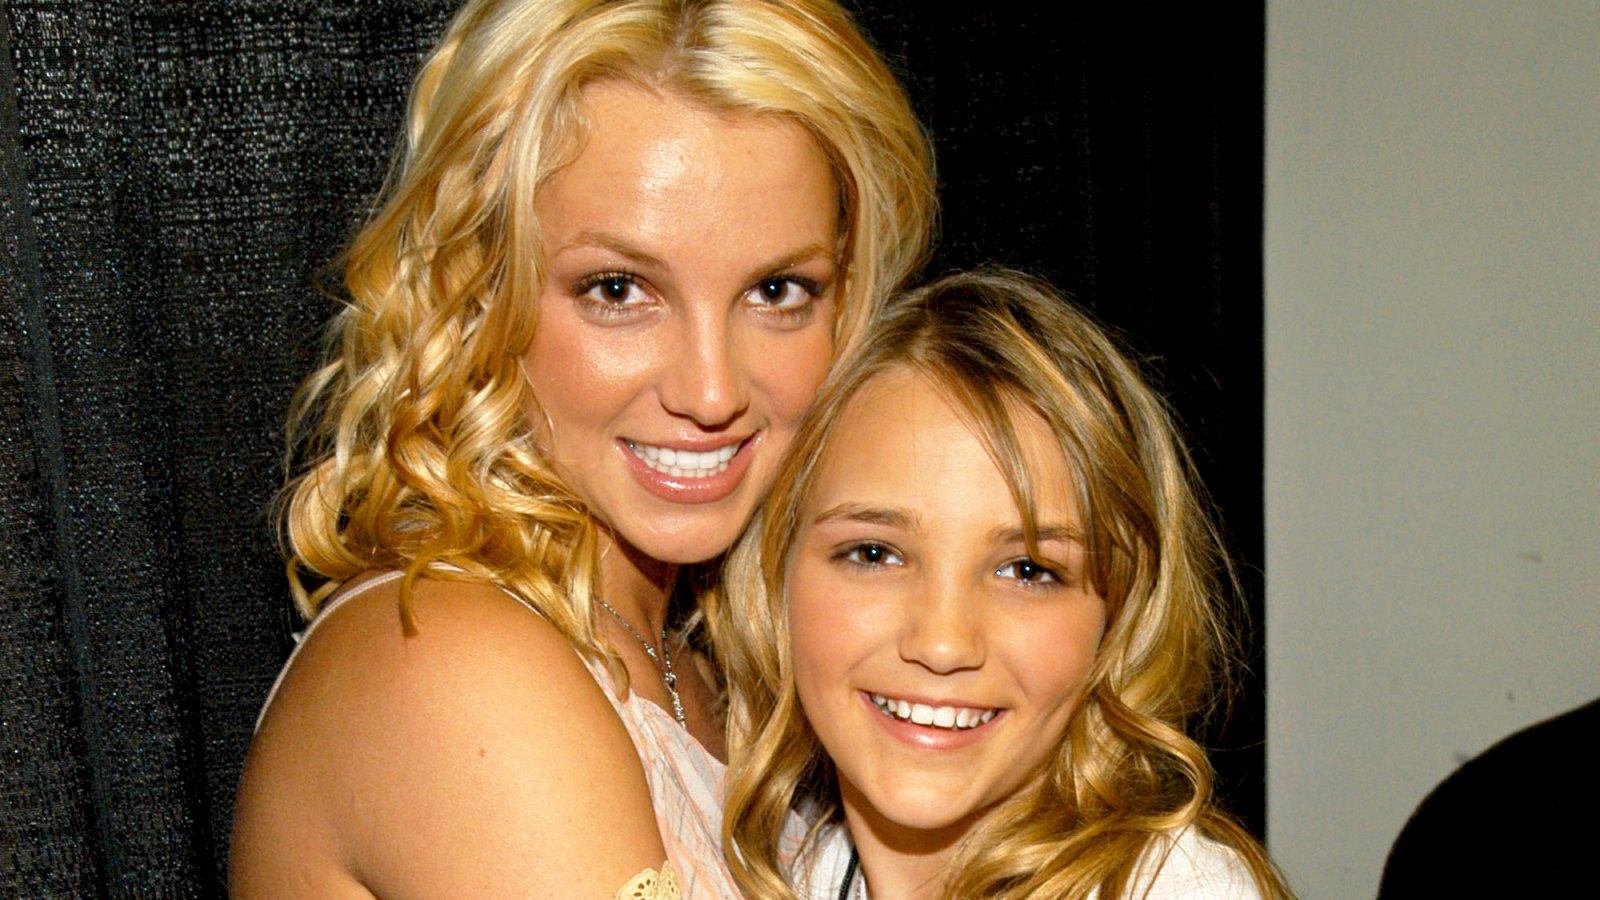 Britney Spears and Jamie-Lynn Spears attend the Nickelodeon Kids Choice Awards 2003.